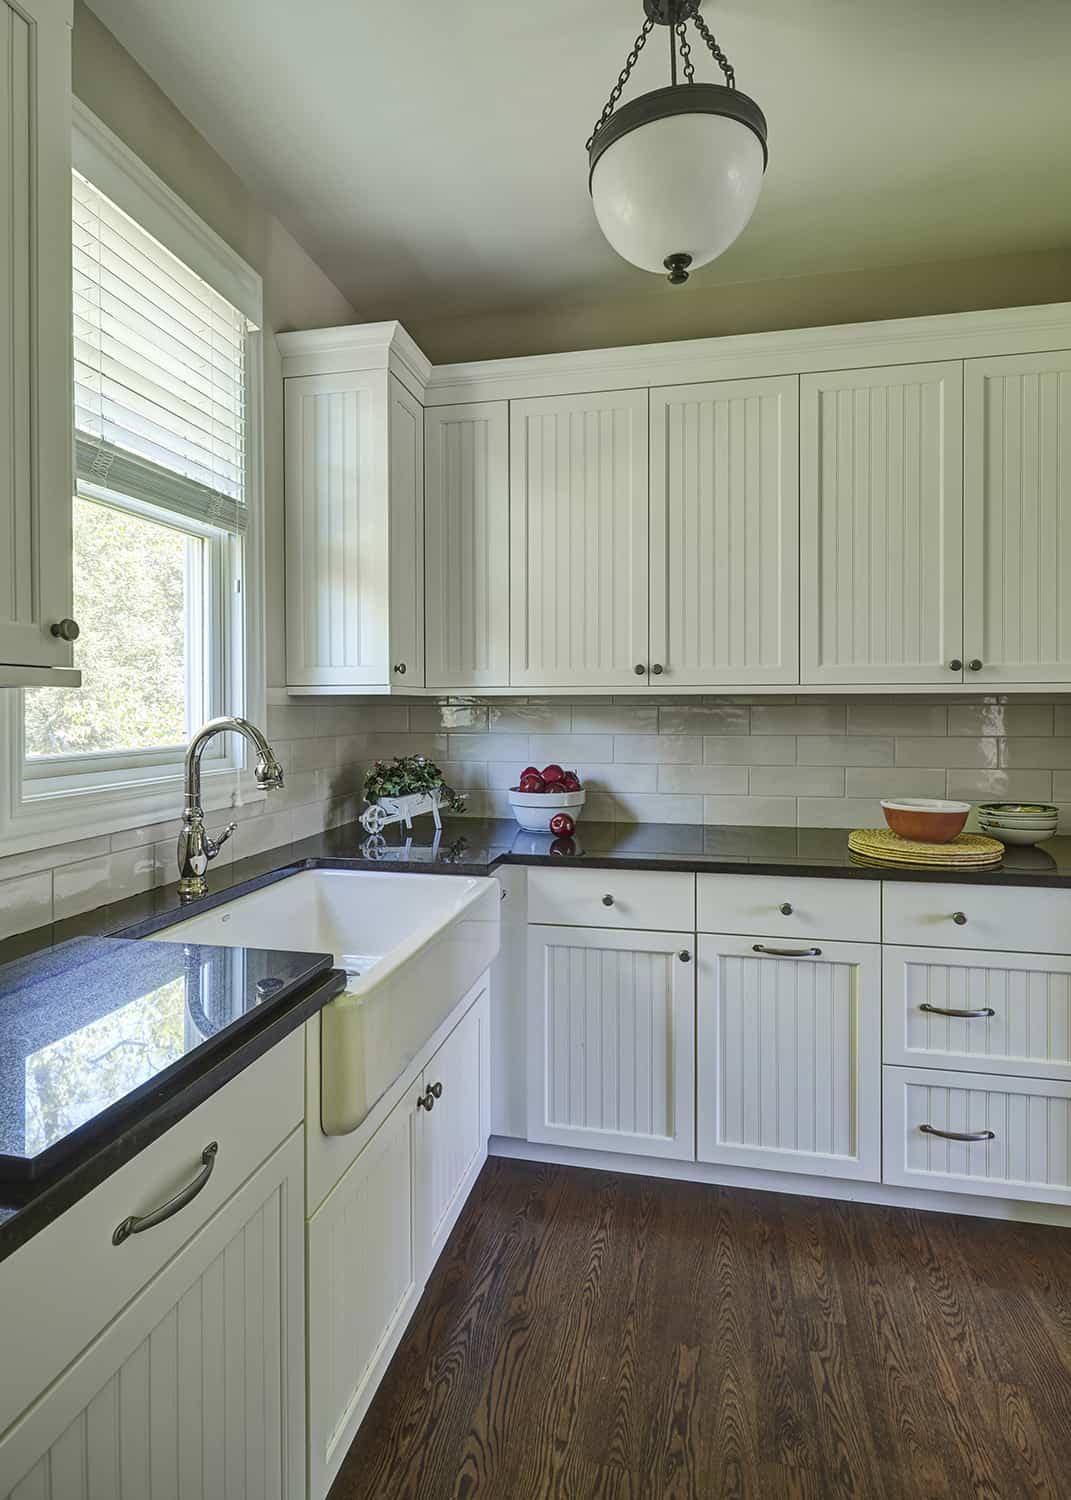 scullery or secondary service kitchen